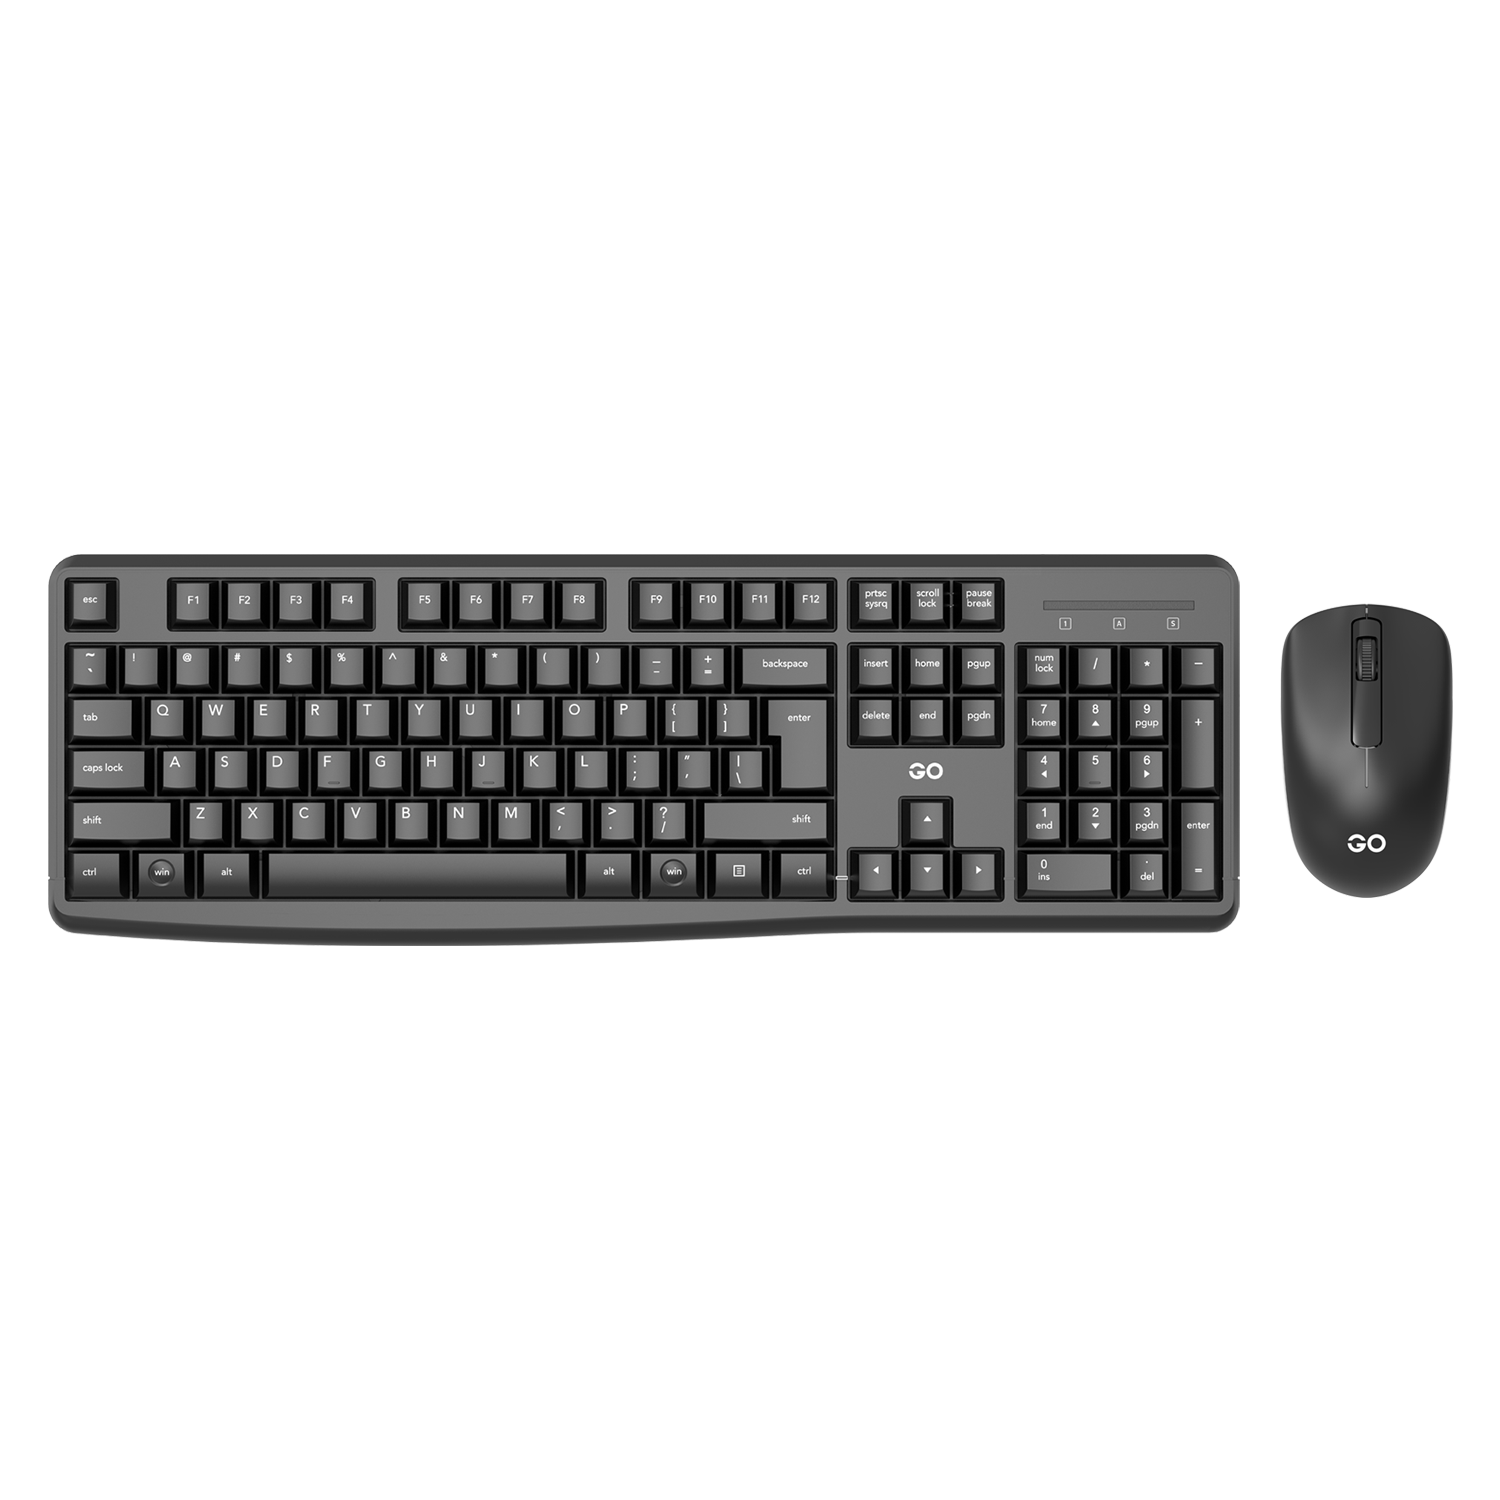 Fantech Office PC Wireless Keyboard and Mouse Combo Computer Set (WK-894)